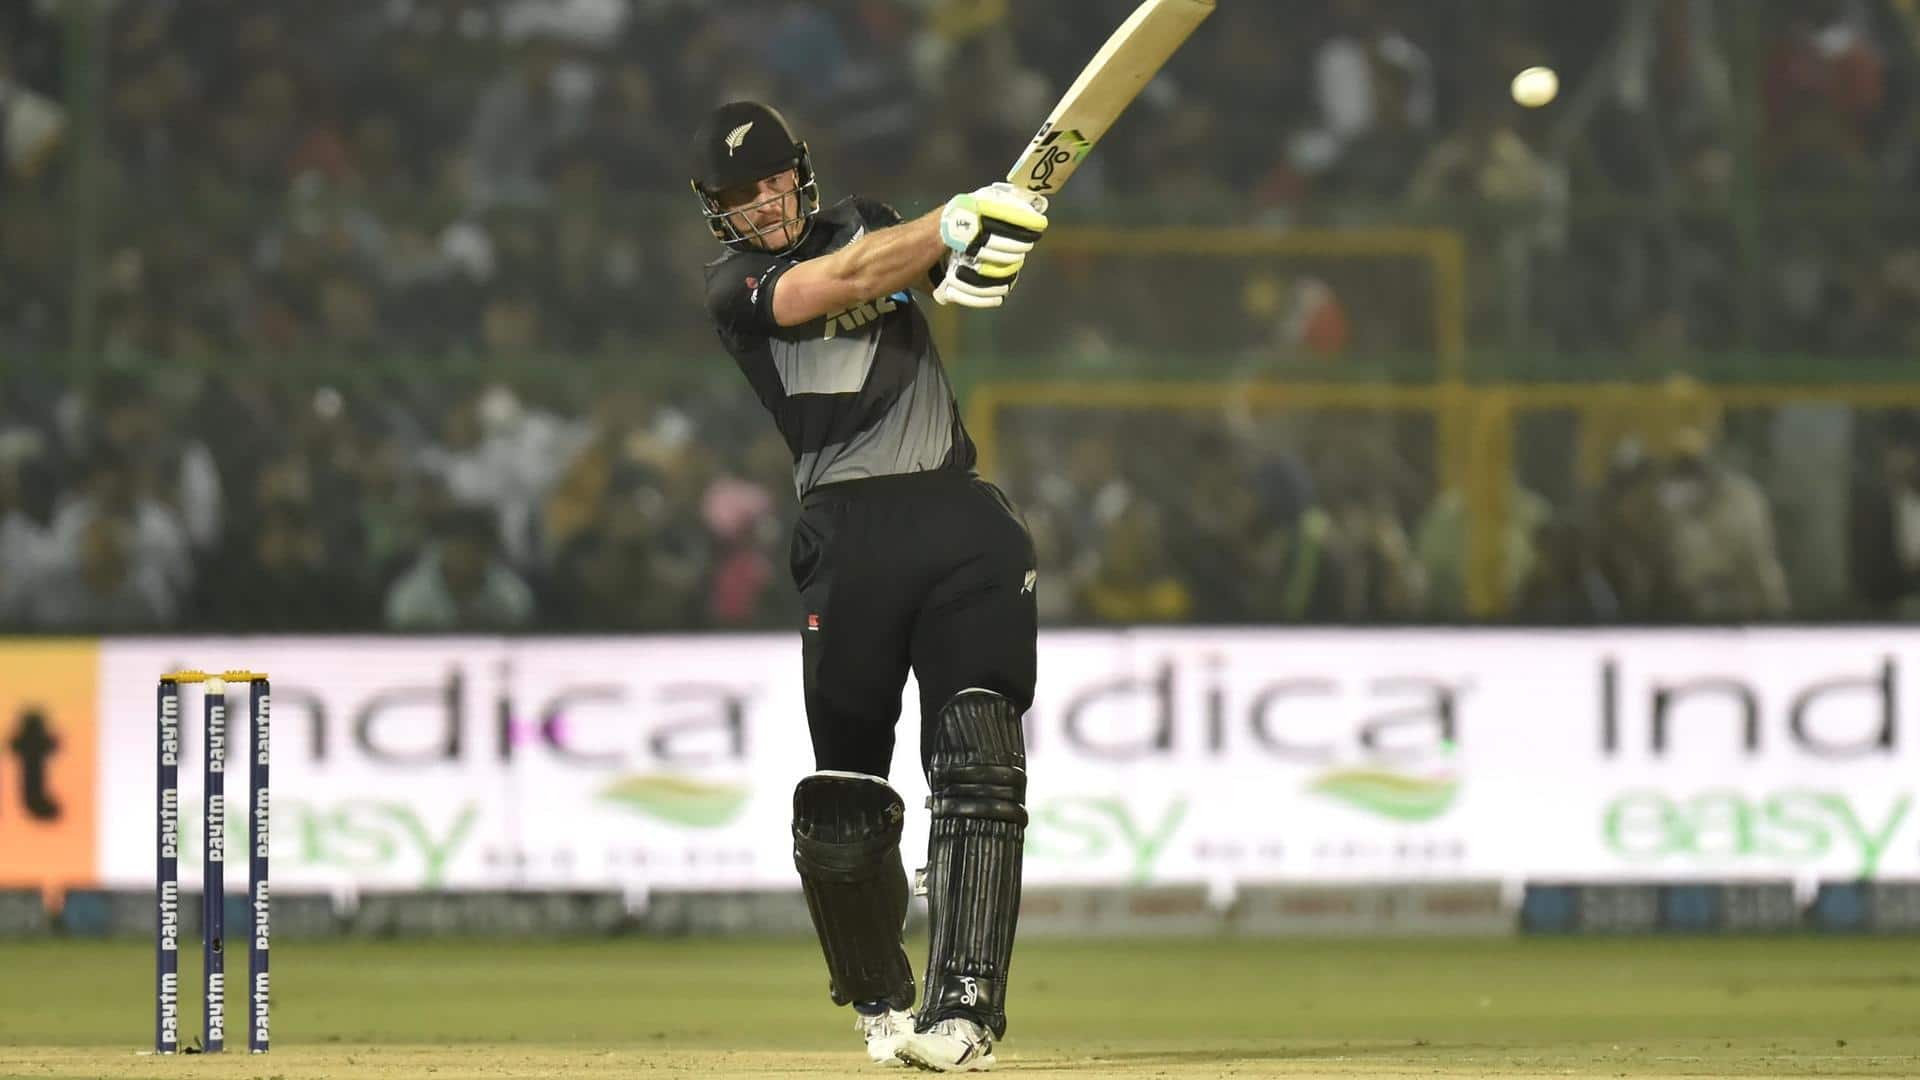 Martin Guptill released from New Zealand central contract: Details here